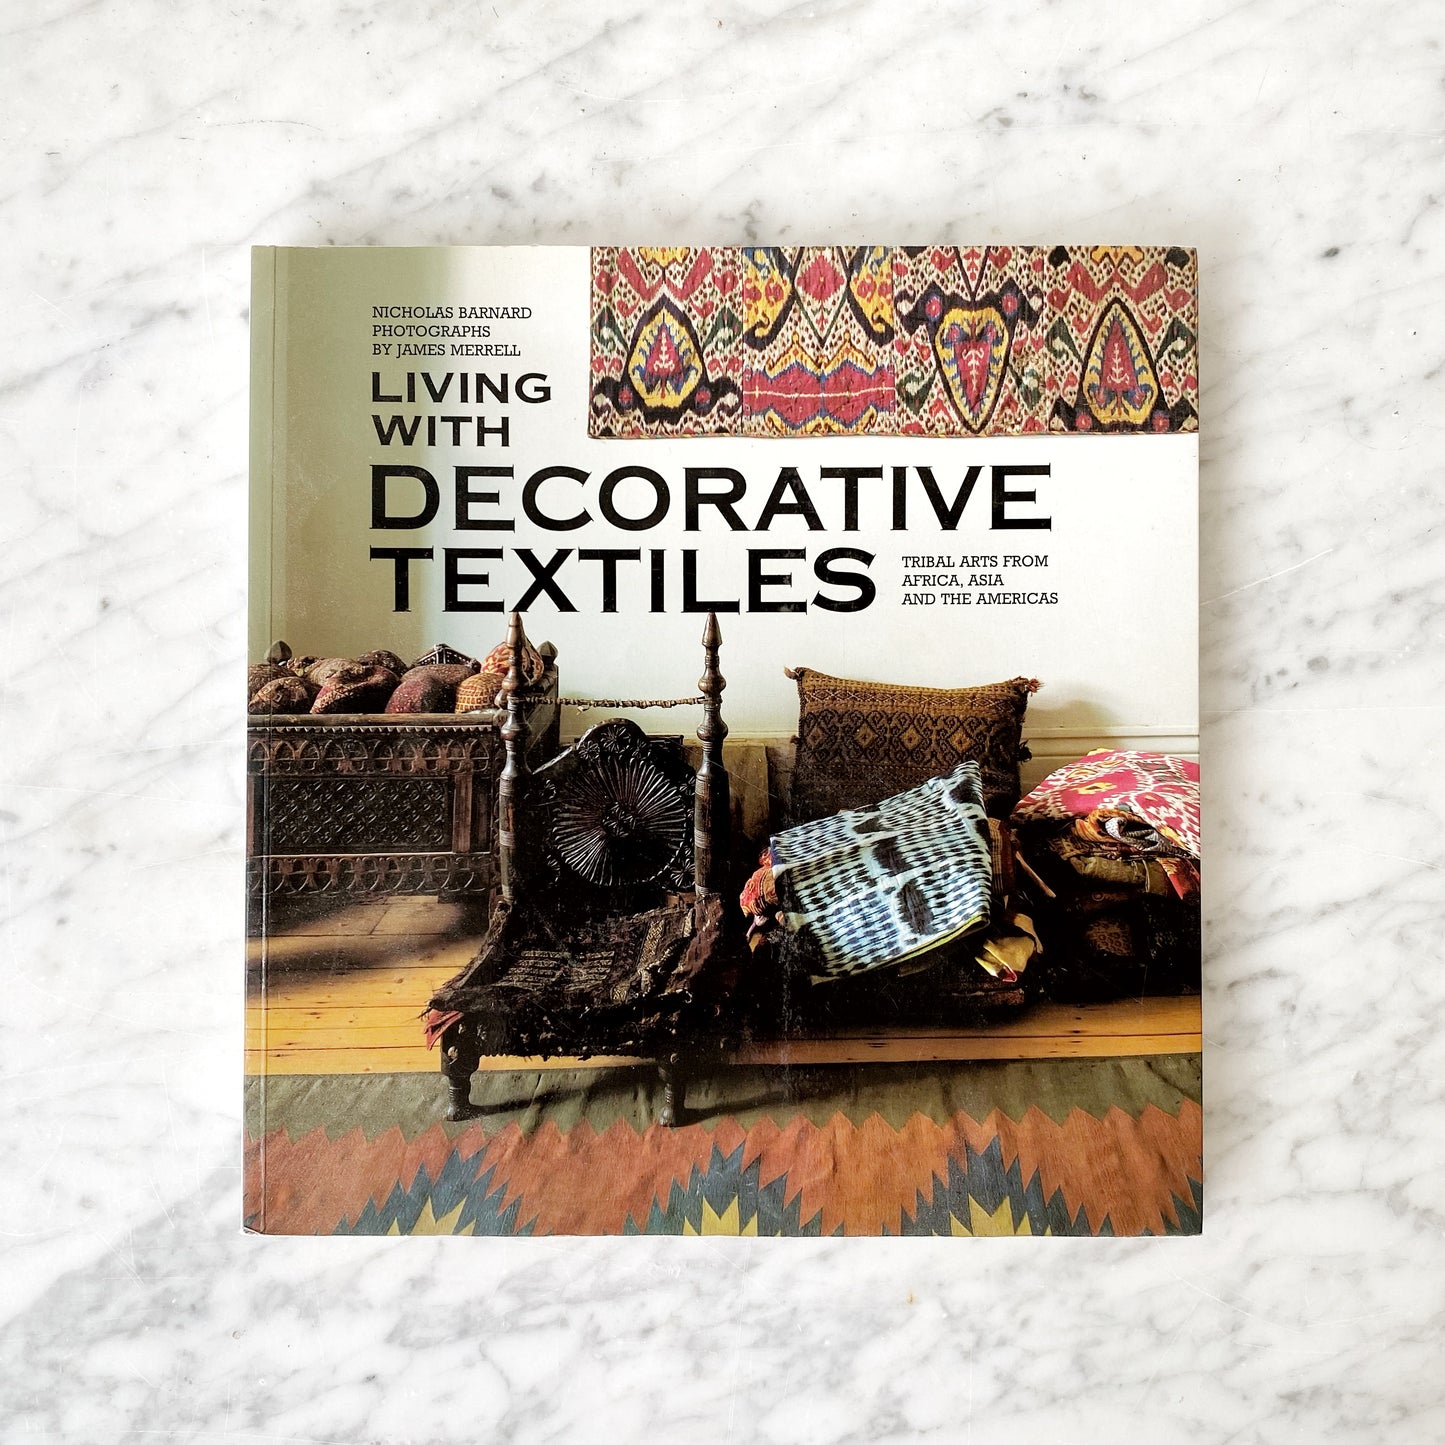 Book: Living with Decorative Textiles